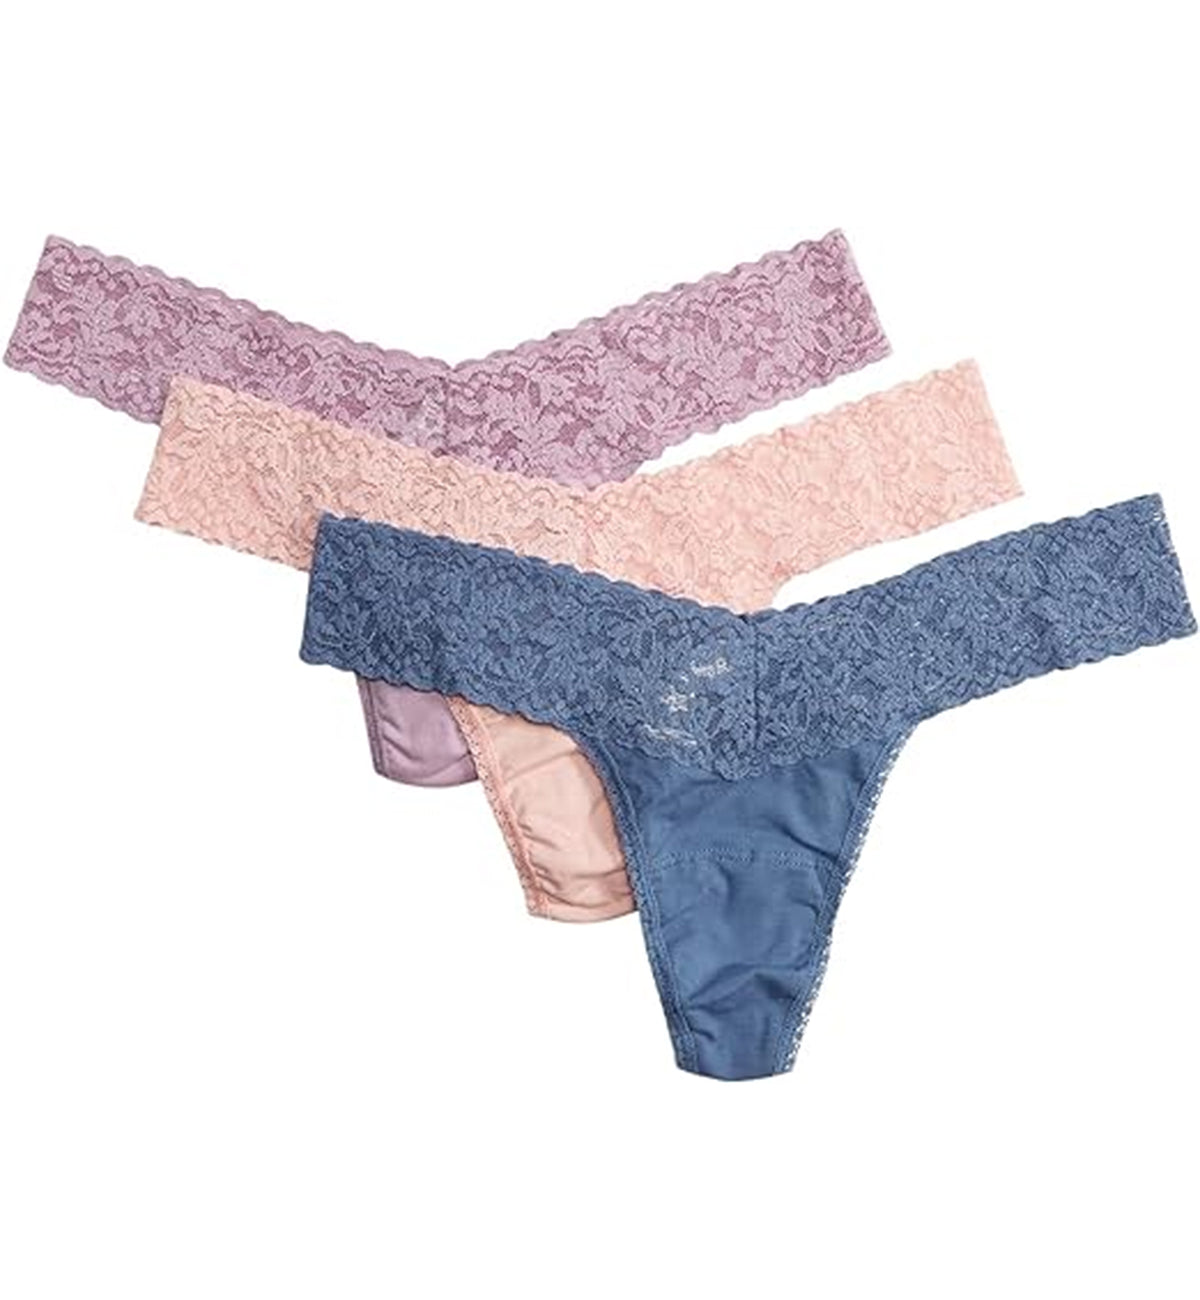 Hanky Panky 3-PACK Cotton Low Rise Thong (89153TPK),Holiday23 FCMB - FCMB,One Size